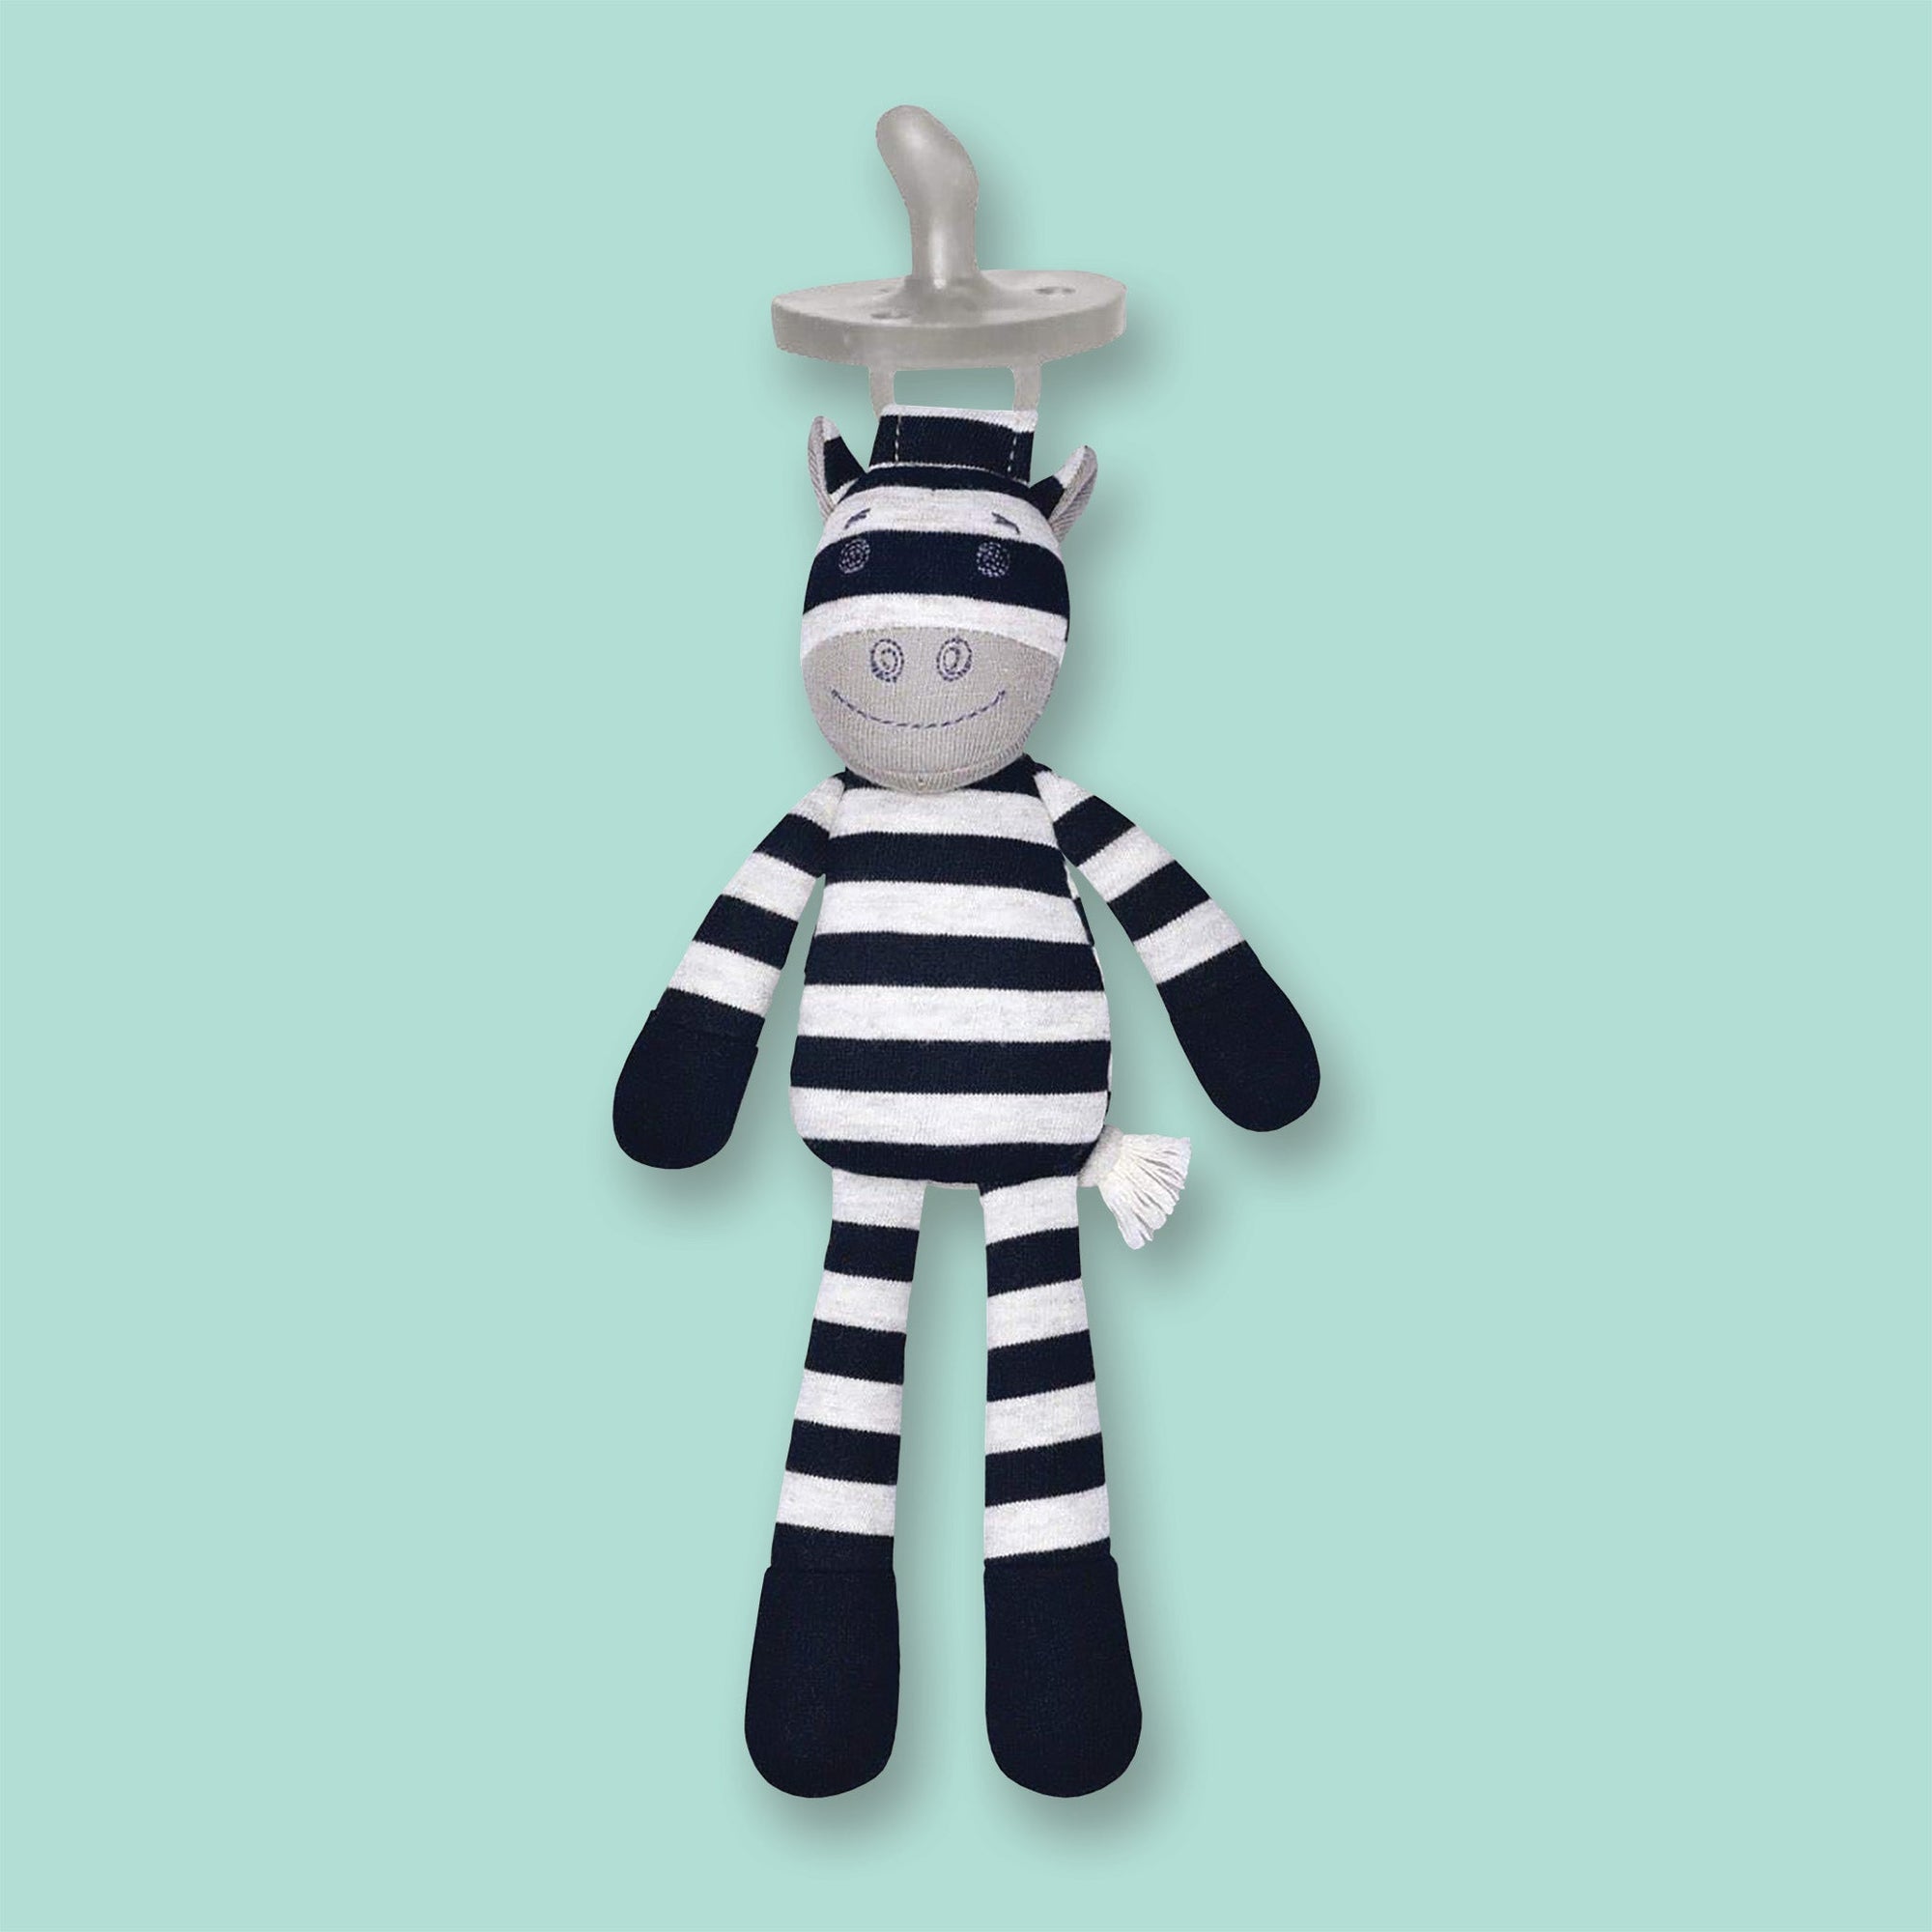 On a mint green background sits a black and grey snuggly buddy. It is an Organic Farms Buddies eco-friendly plush pacifier striped cow.